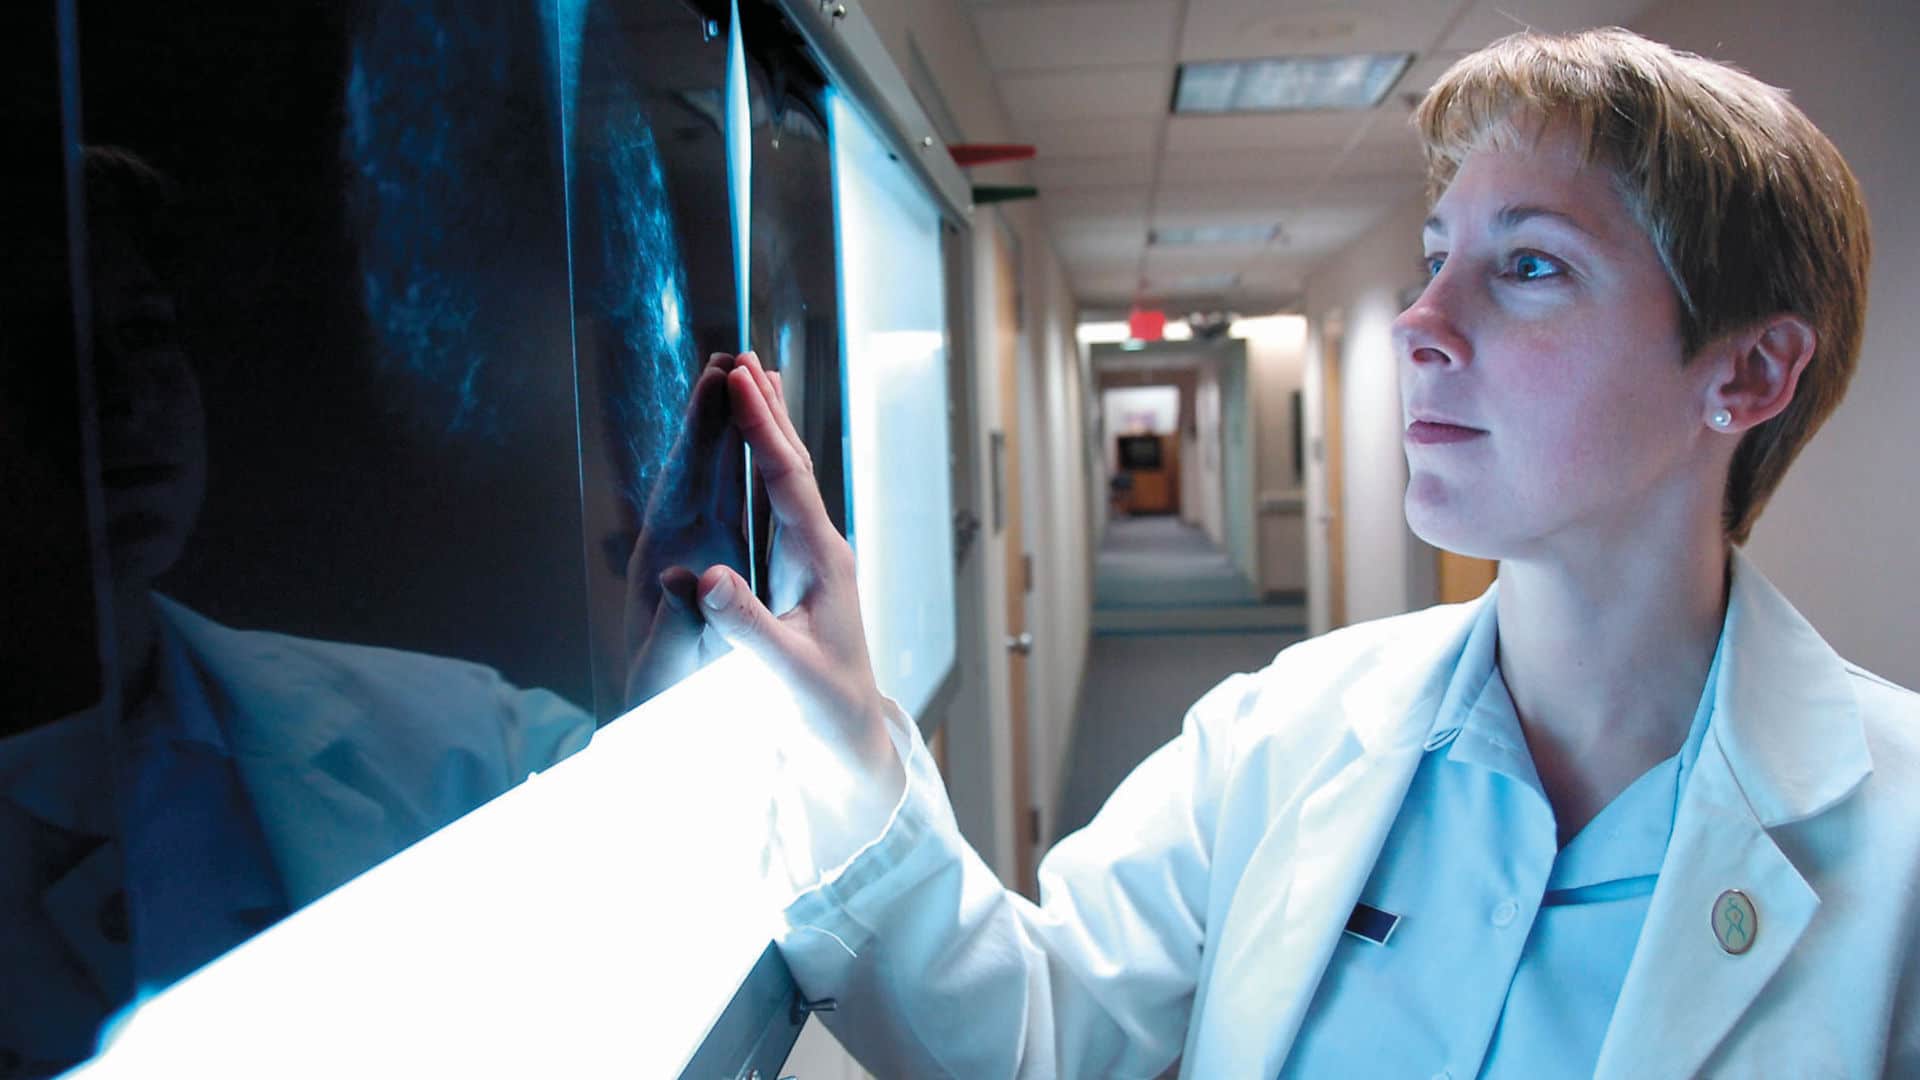 Major (Dr.) Shannon Lehr screens a set of mammogram X-rays taken during a patient's office visit.